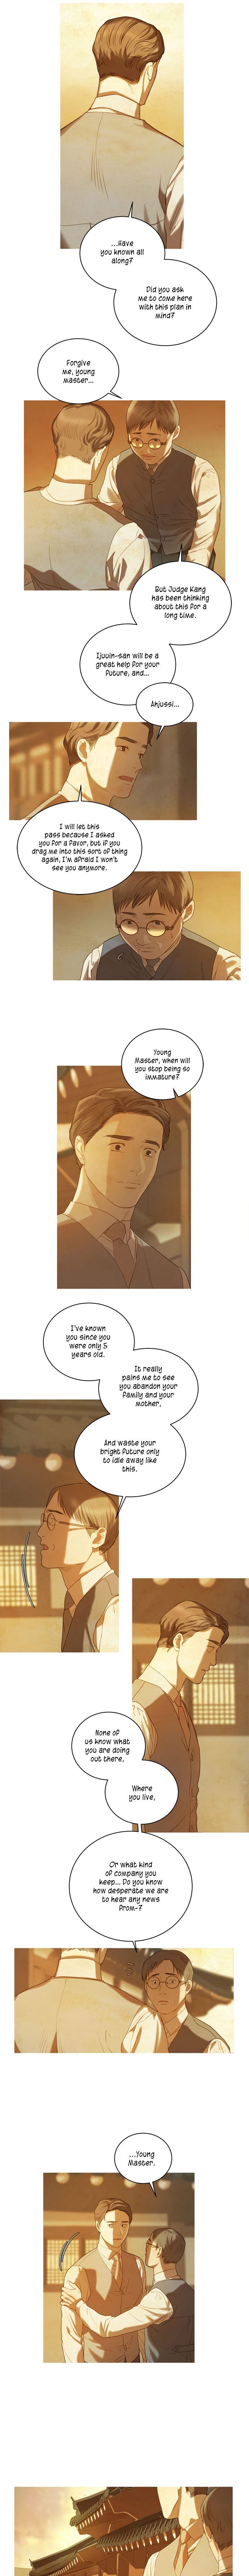 Gorae Byul - The Gyeongseong Mermaid - Chapter 34 Page 13